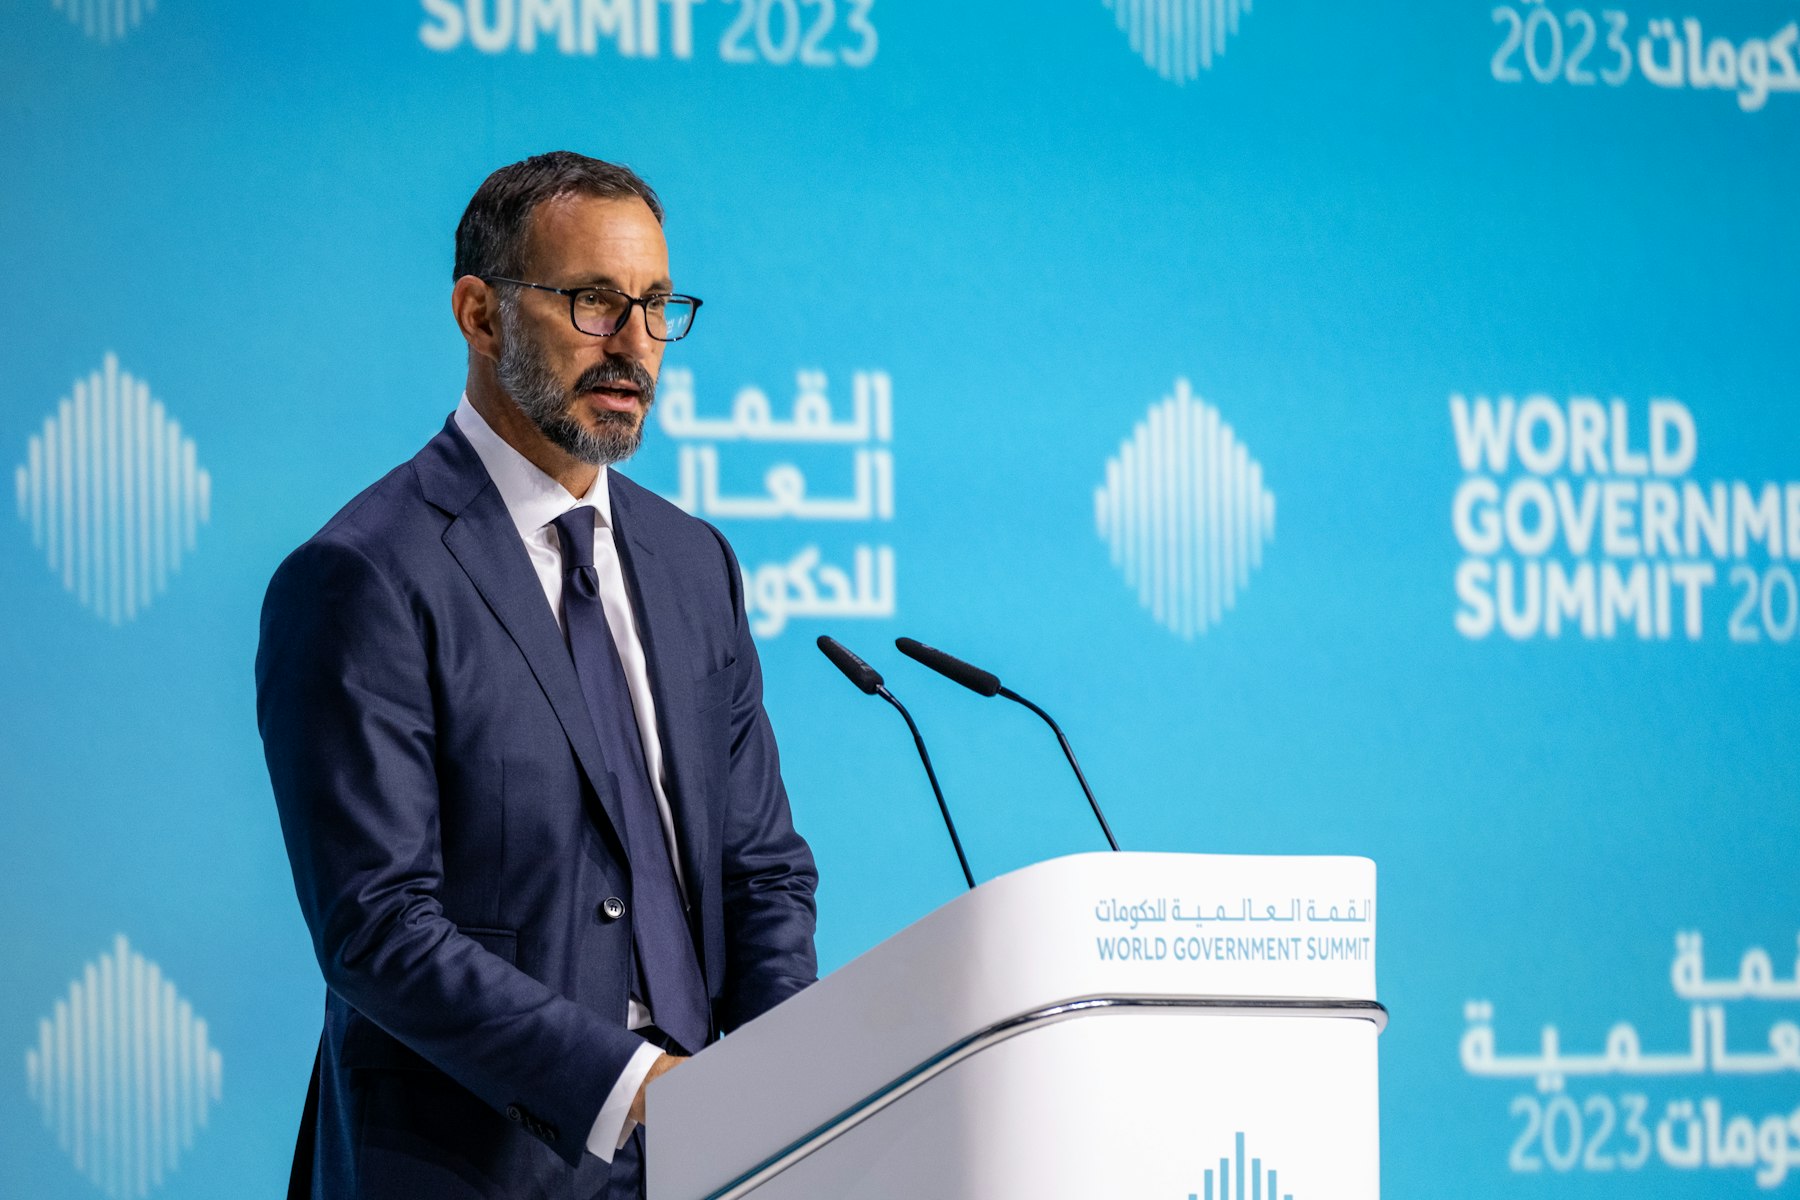 At the World Government Summit in Dubai on 13 February 2023, Prince Rahim Aga Khan spoke about urbanisation in the developing world against the backdrop of climate change. He focused on infrastructure, health and emissions, and showcased the Al-Azhar Park project in Cai